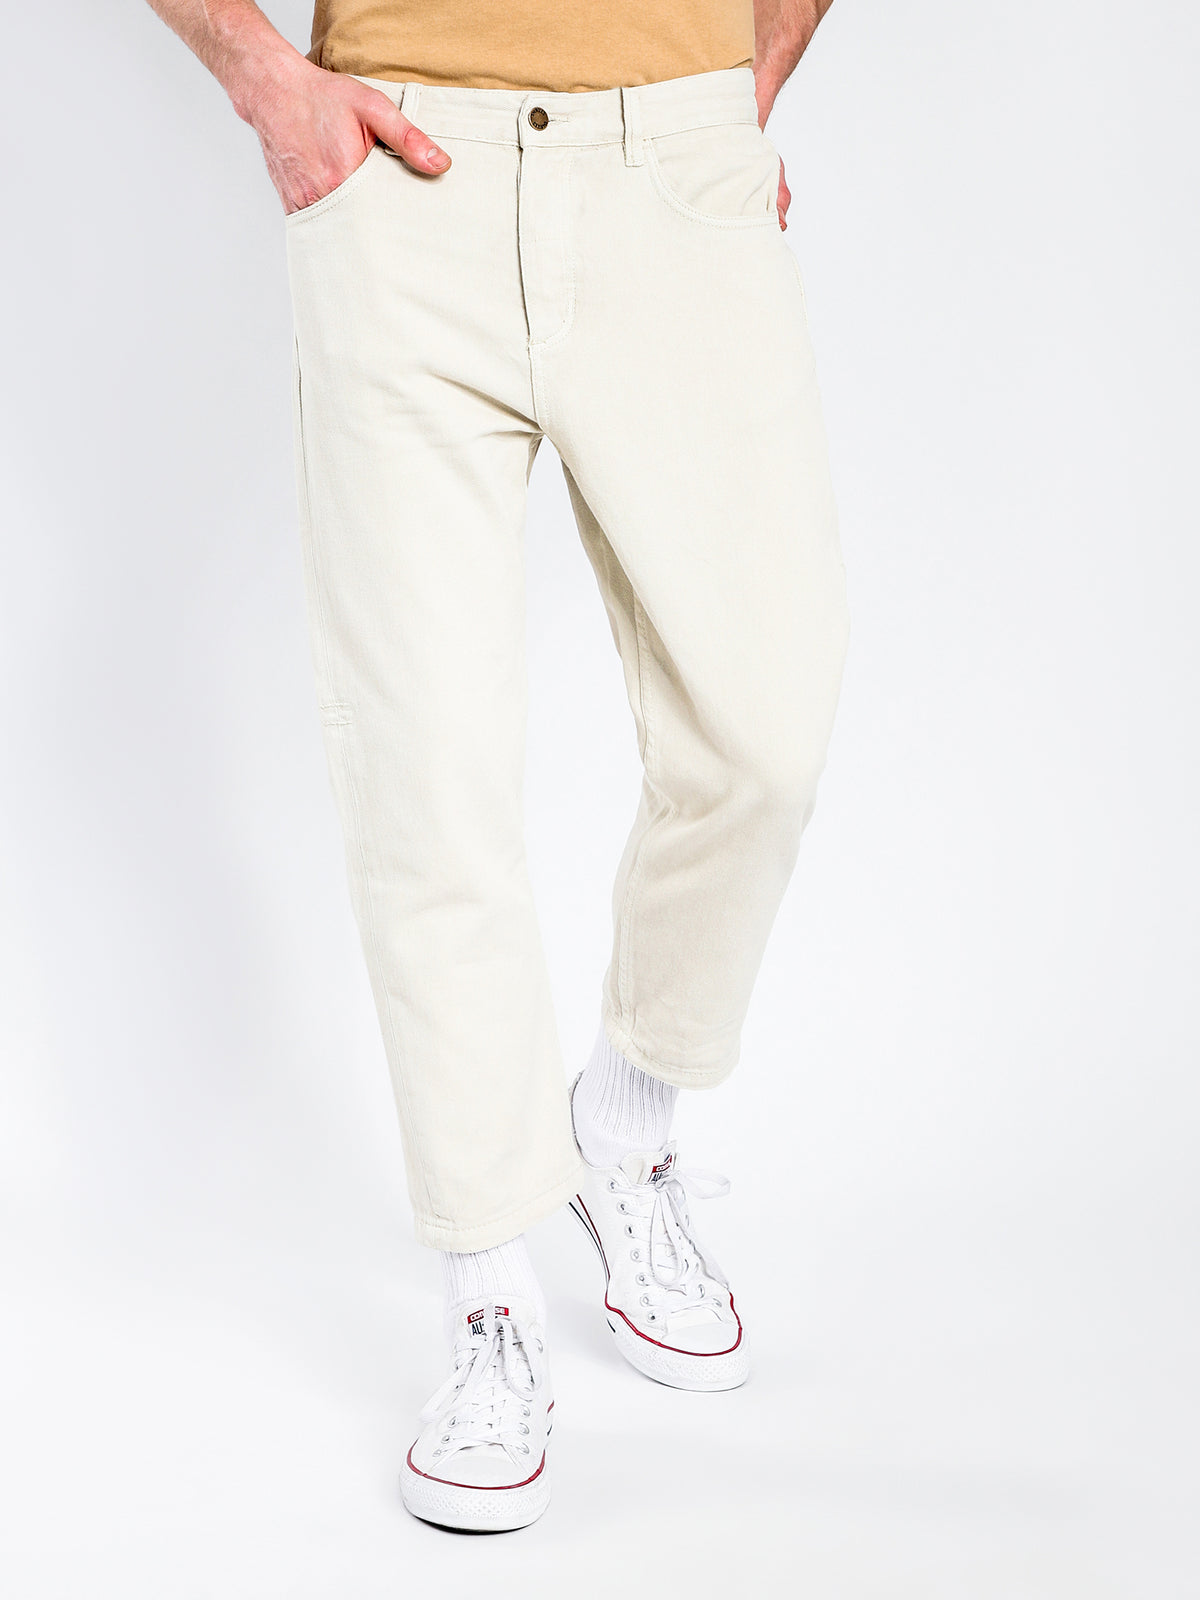 Drilled Chopped 5-Pocket Pants in Dirty White Denim